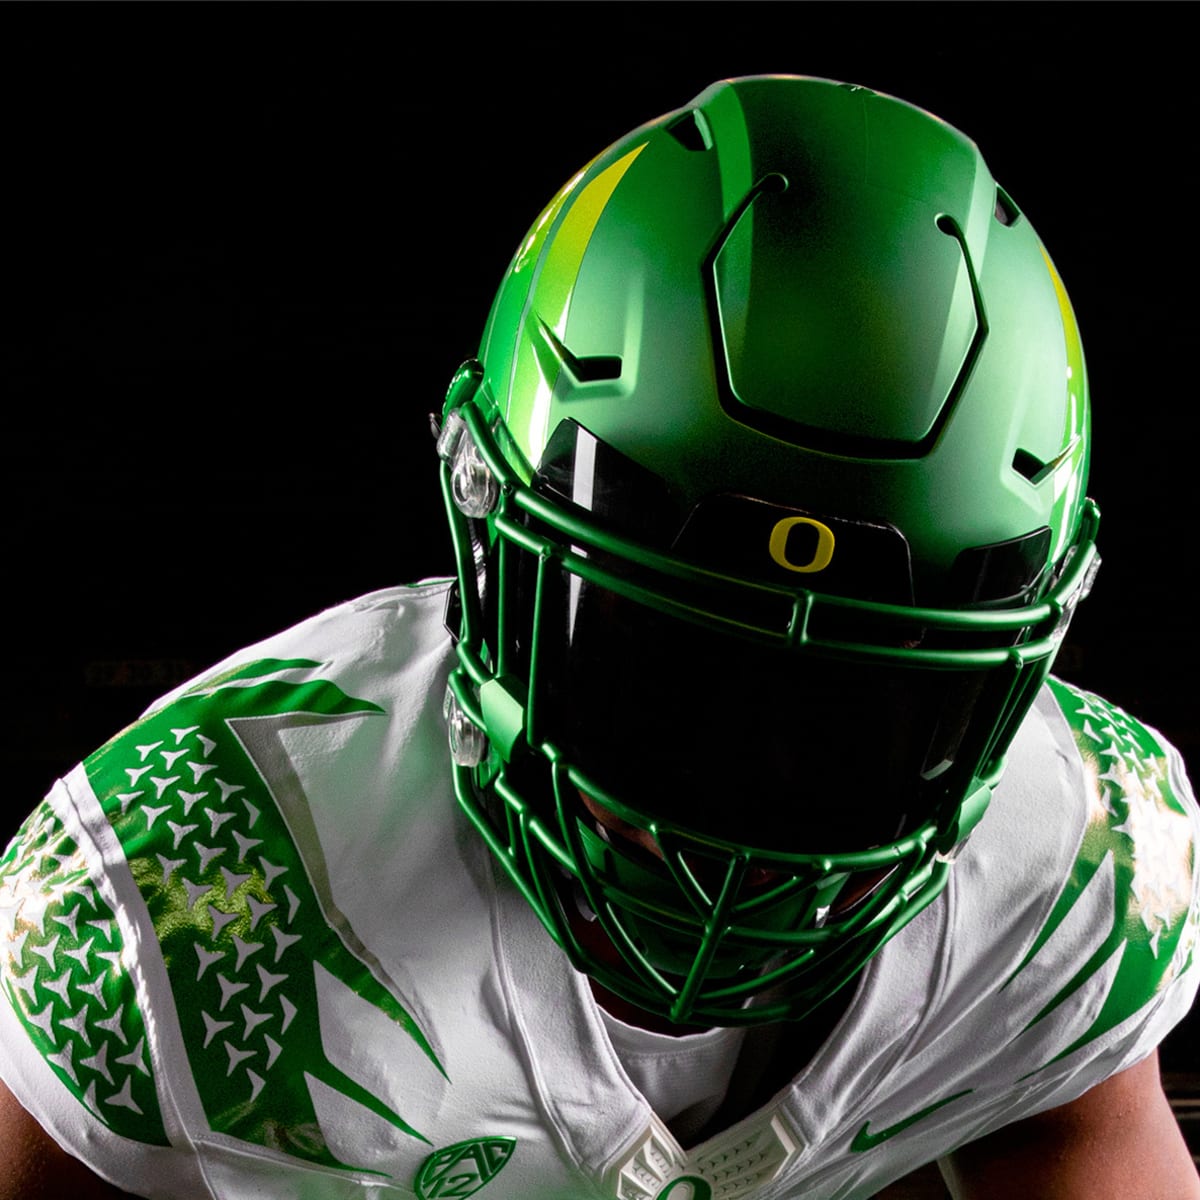 Oregon Football Releases New Uniforms for 2021 Season - Sports Illustrated  Oregon Ducks News, Analysis and More